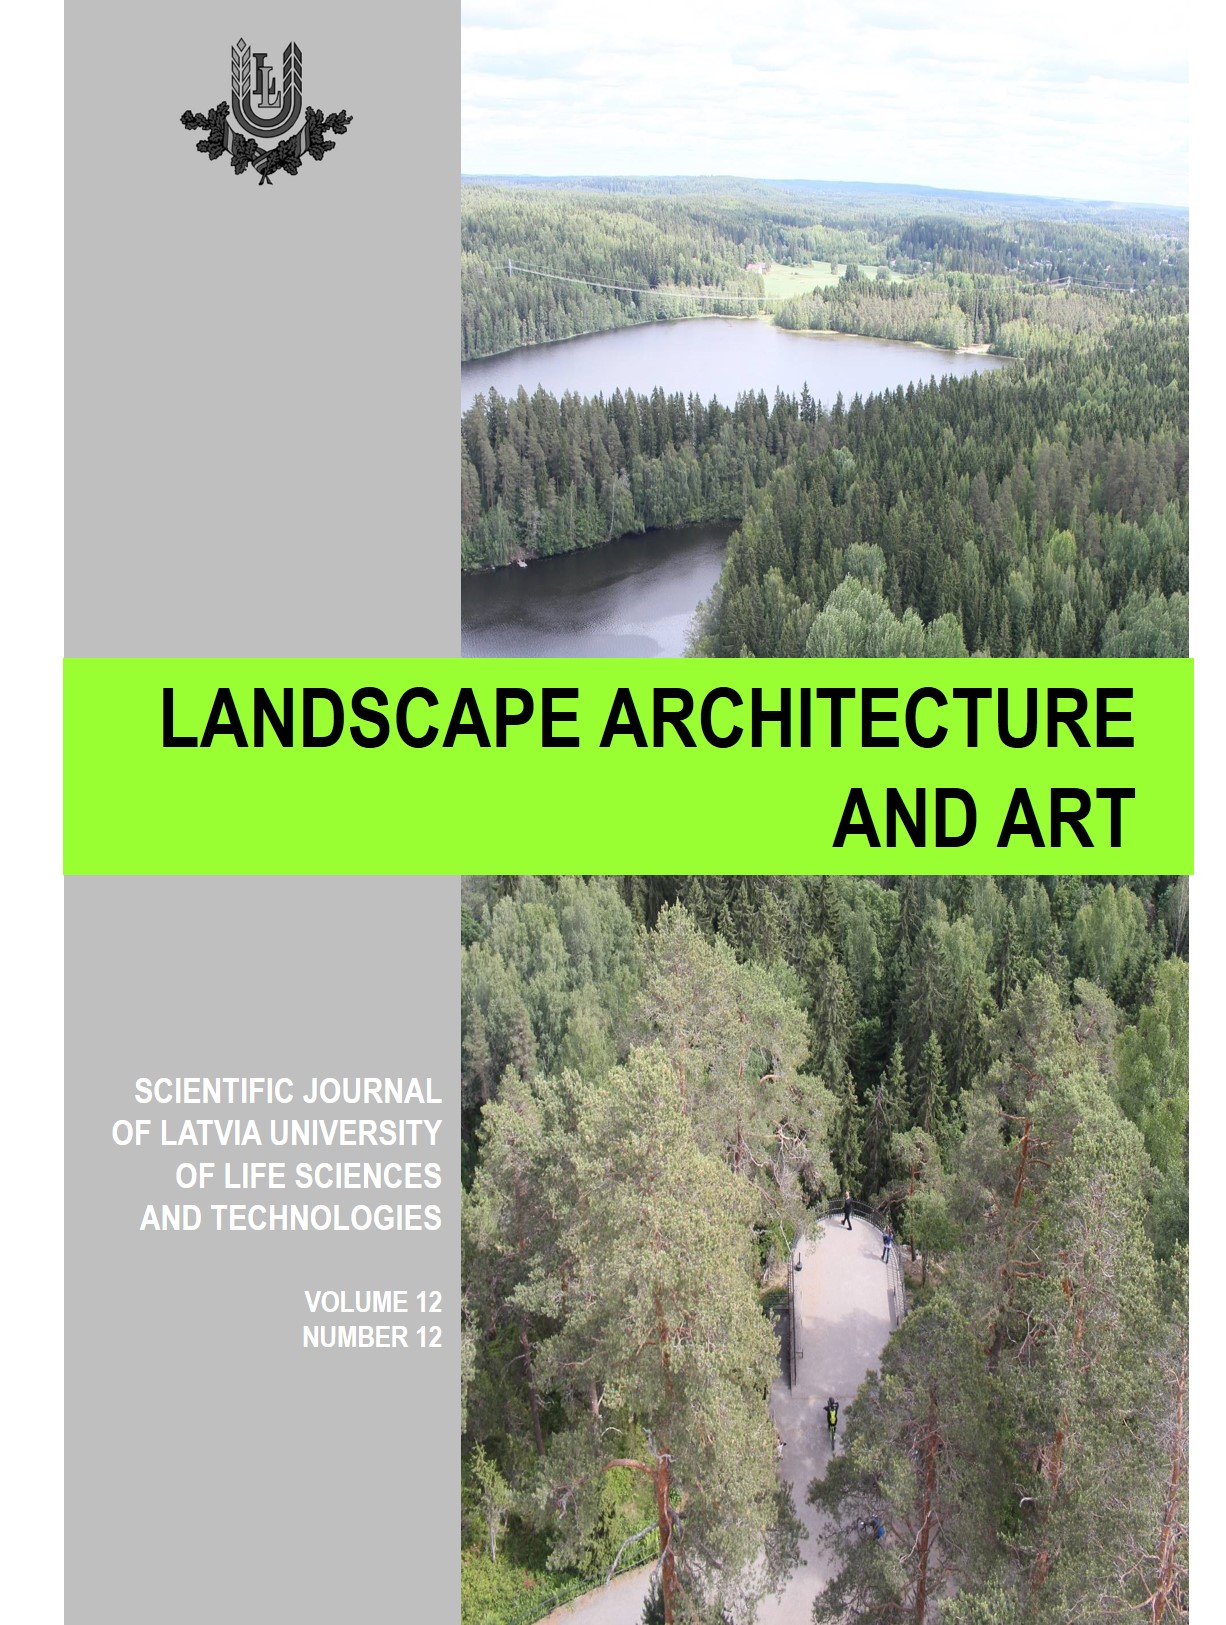 Landscape Architecture and Art, Volume 12, Number 12